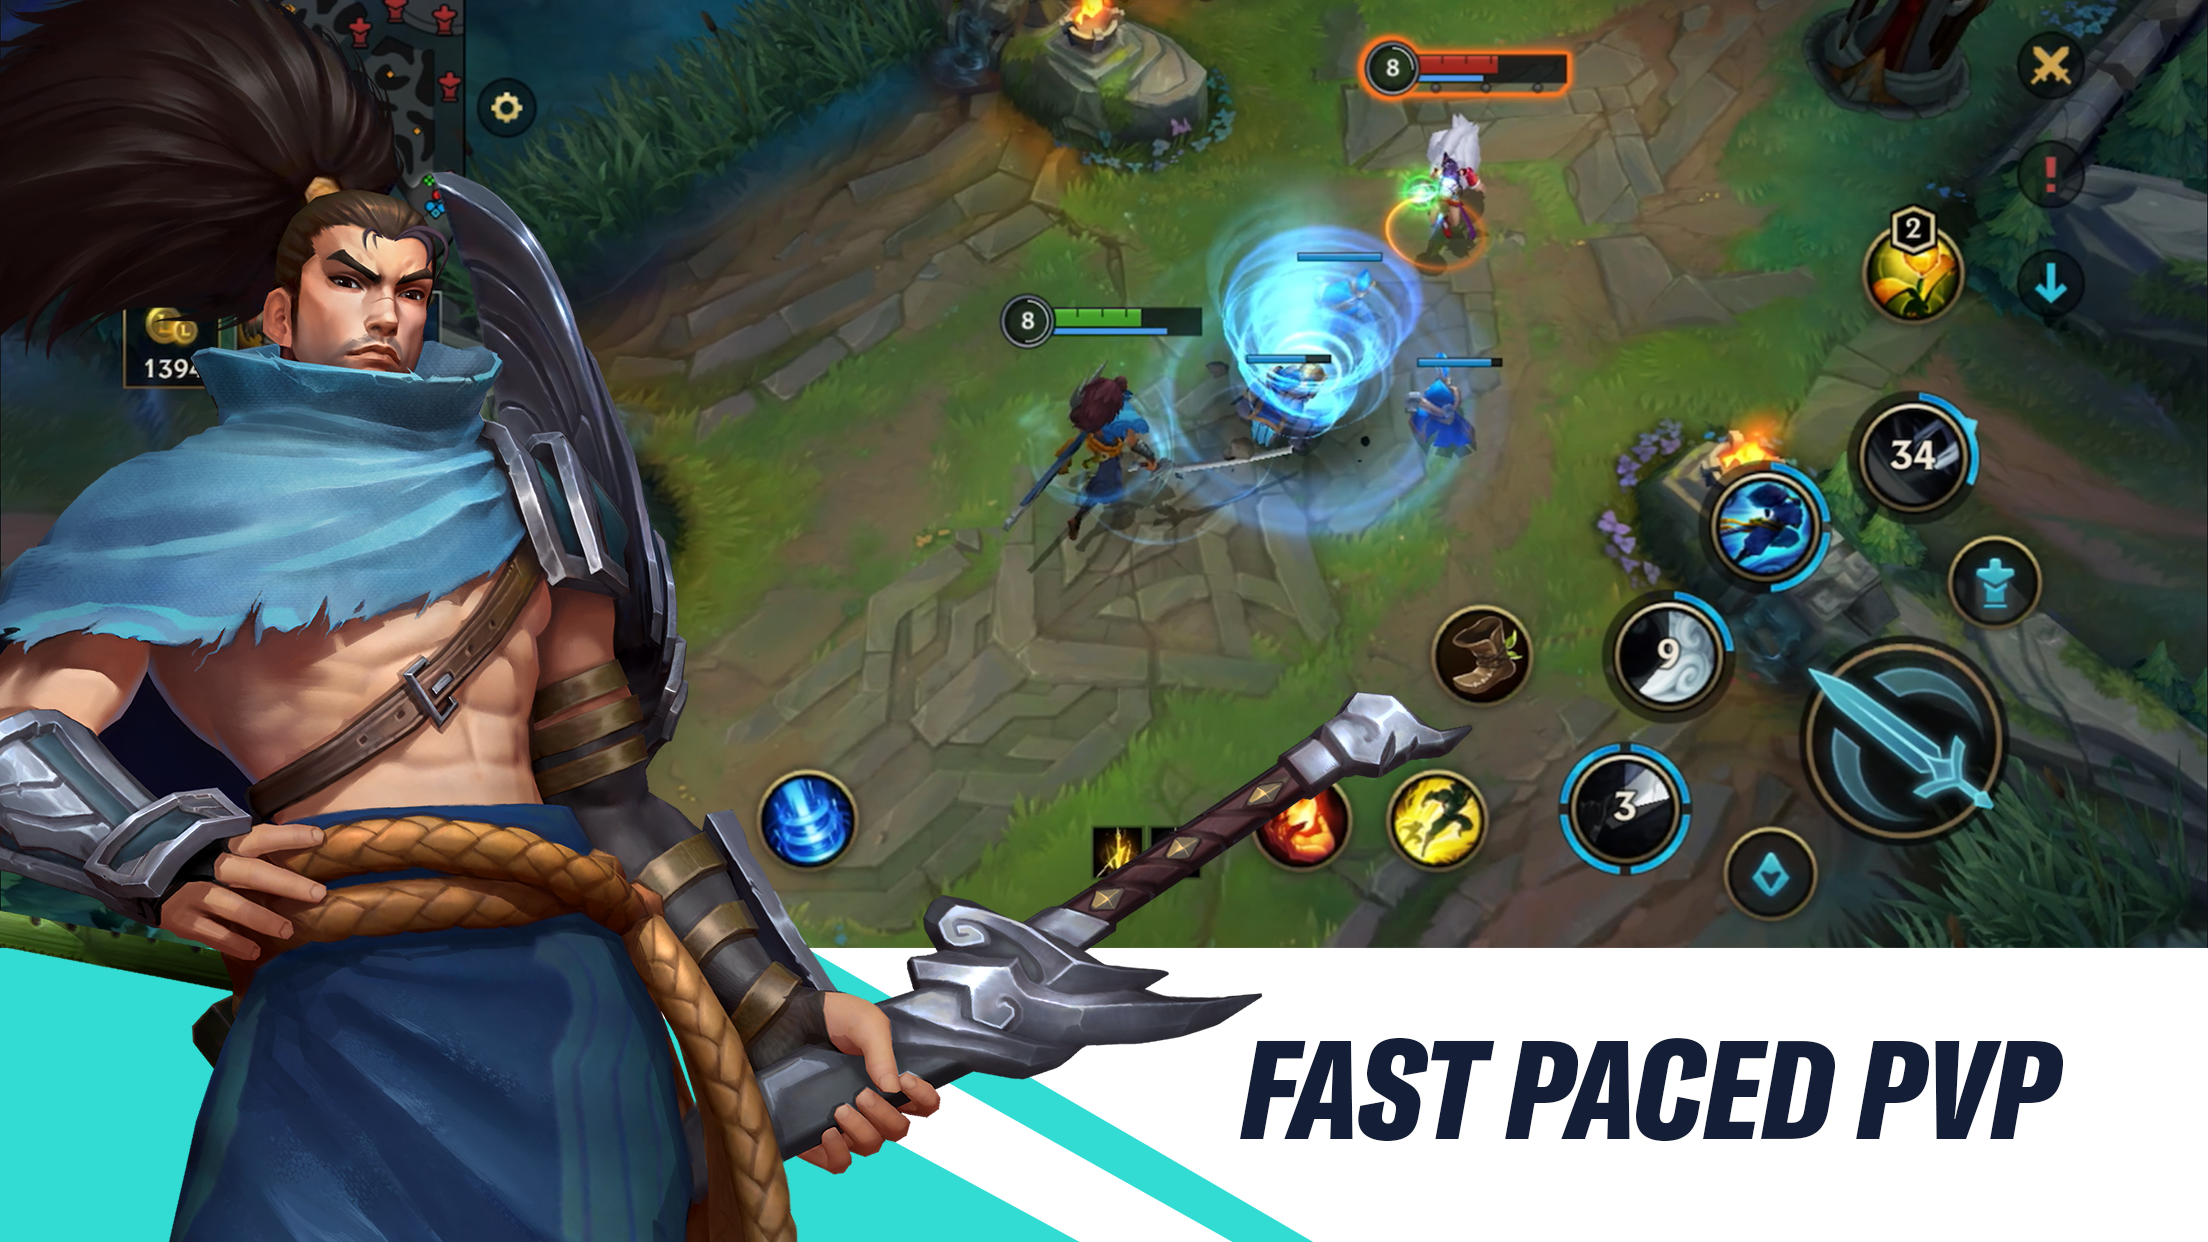 League Of Legends: Wild Rift - Differences Between The Mobile Game And PC  Version